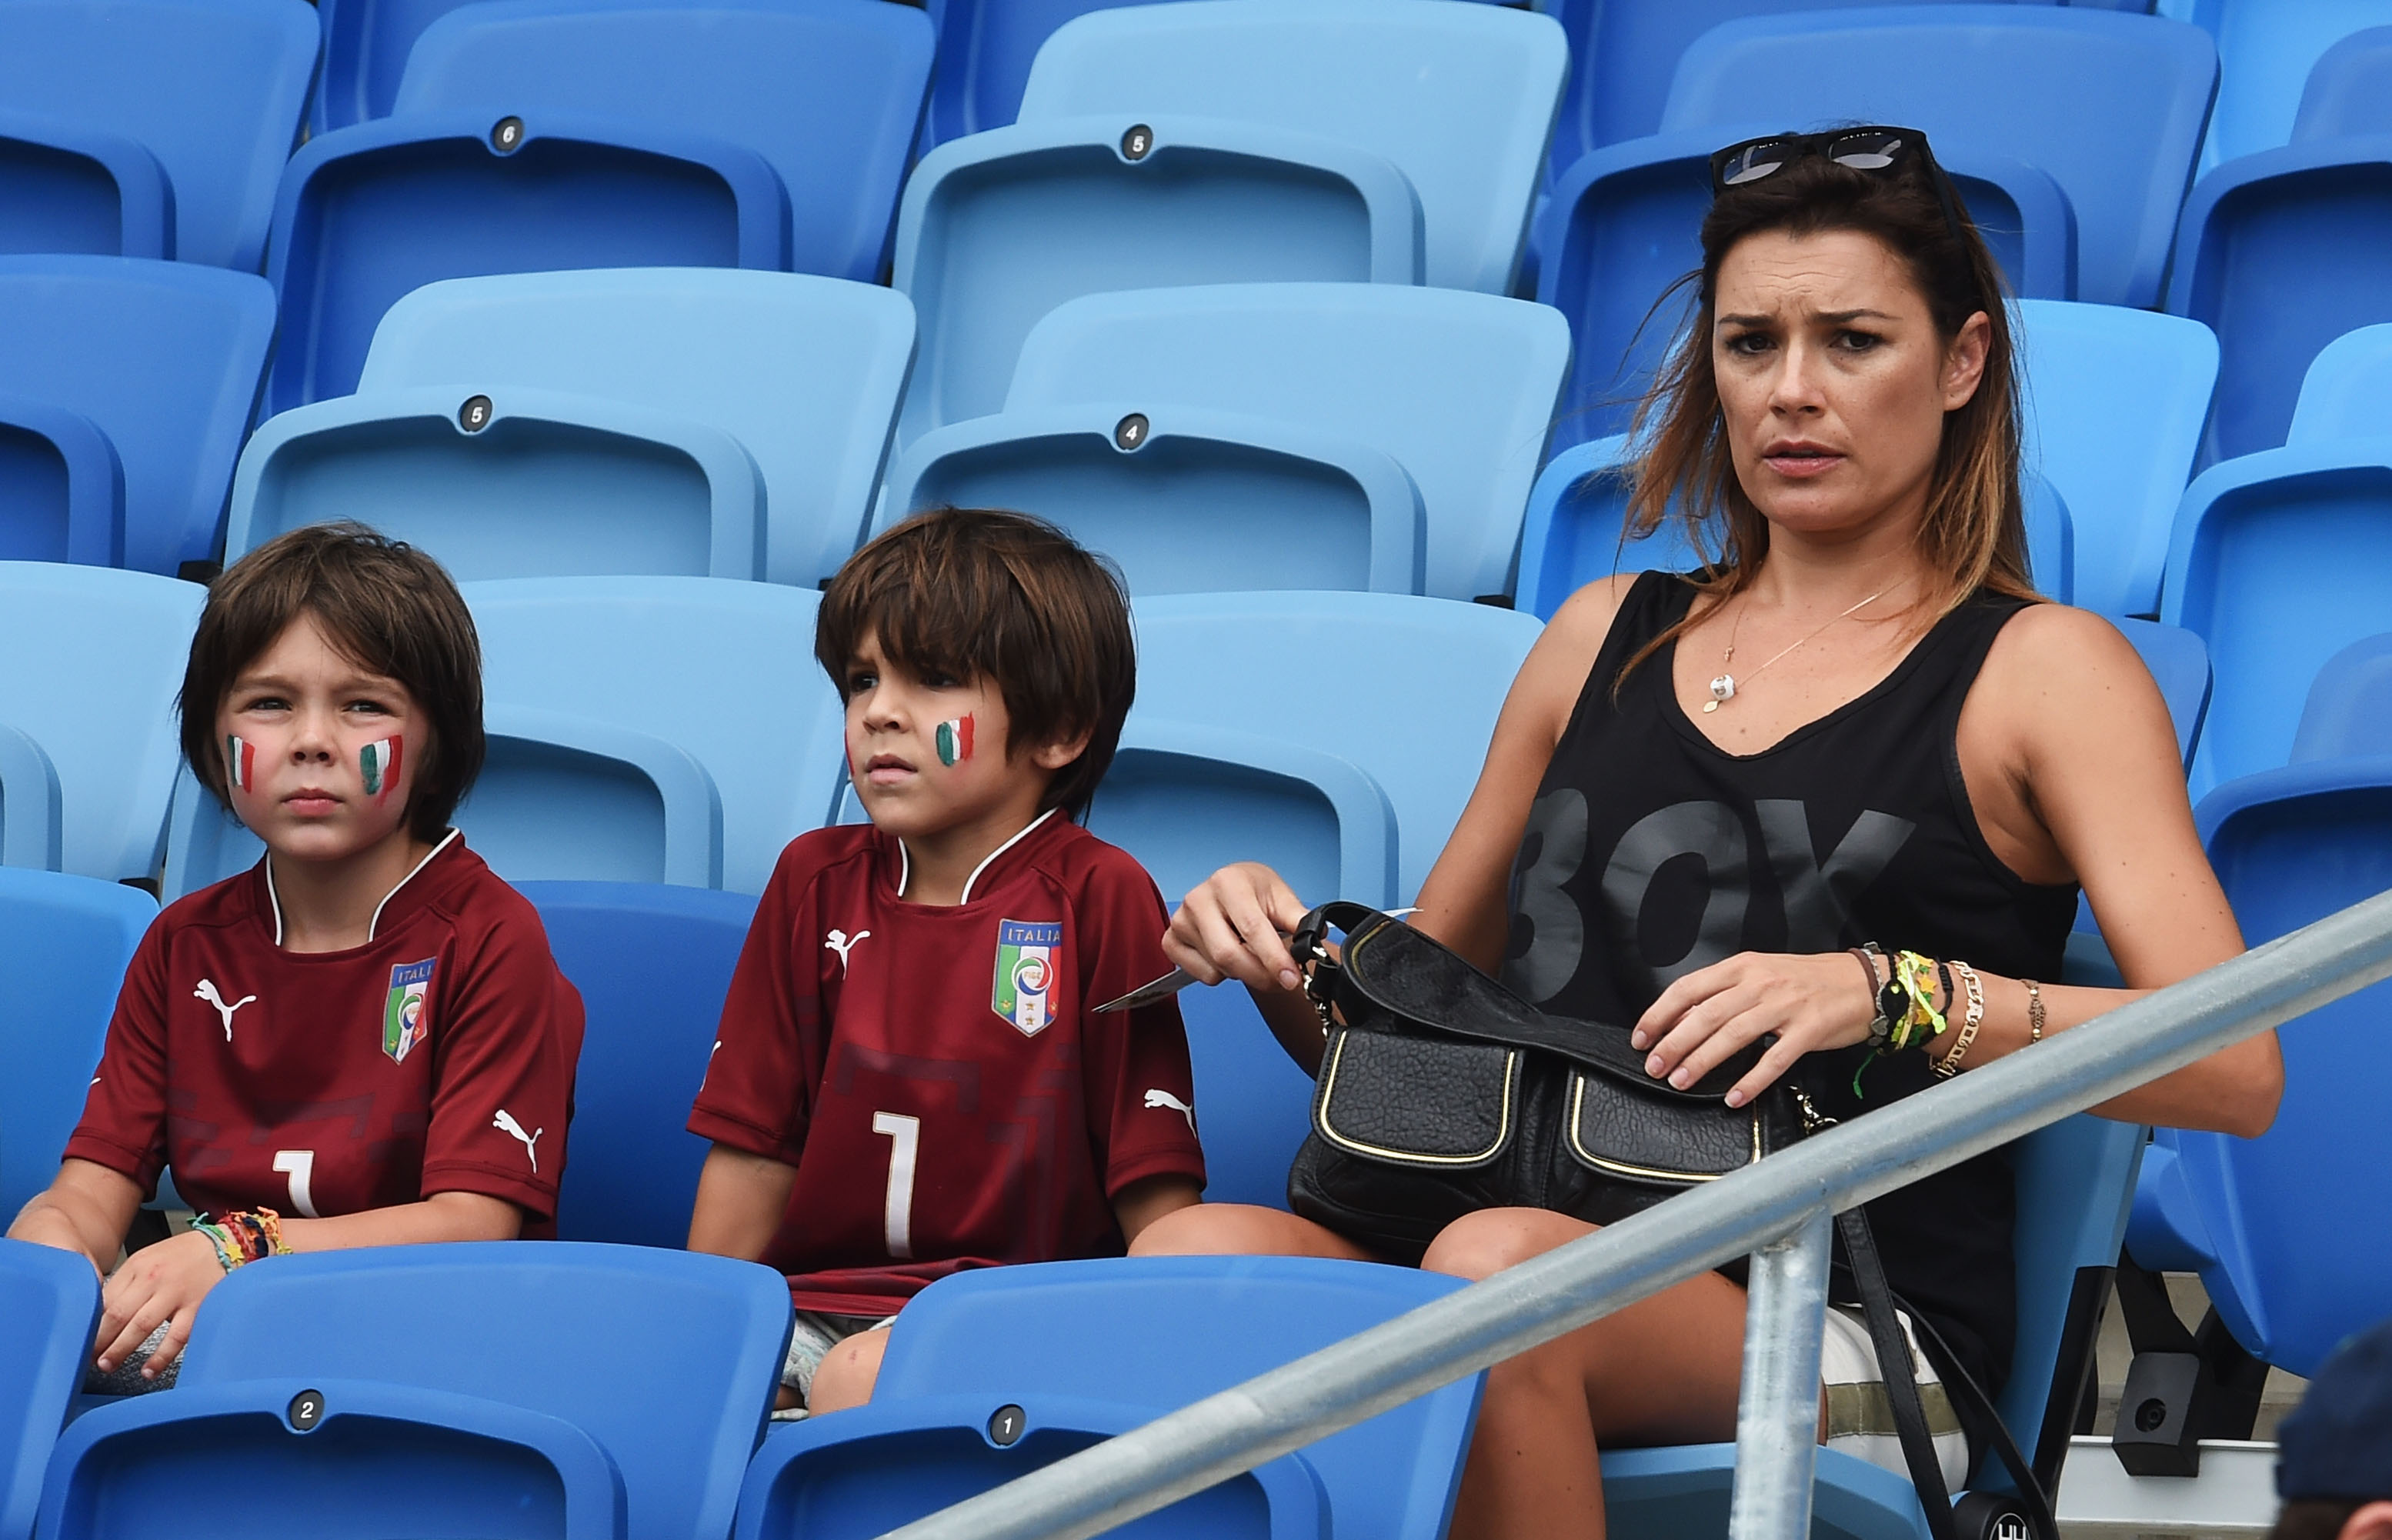 NATAL, BRAZIL - JUNE 24:  Alena Seredova, wife of Gianluigi Buffon of Italy, looks on looks on with their sons David and Louis ahead of the 2014 FIFA World Cup Brazil Group D match between Italy and Uruguay at Estadio das Dunas on June 24, 2014 in Natal, Brazil.  (Photo by Claudio Villa/Getty Images)